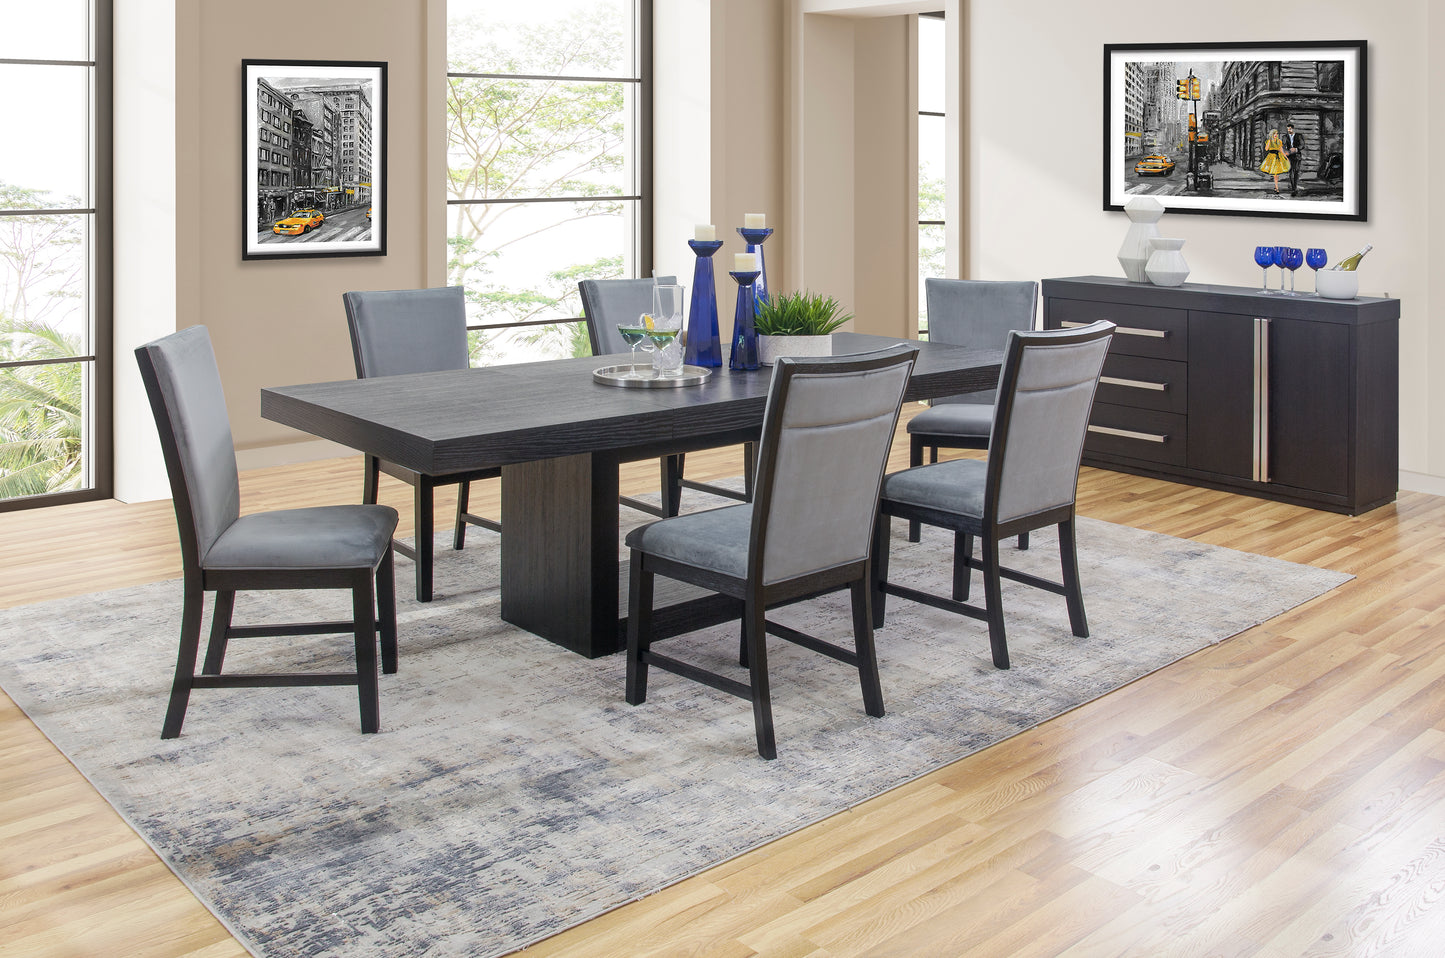 Cosmopolitan 5 Piece Rectangular Dining Set with Upholstered Back Grey Chairs